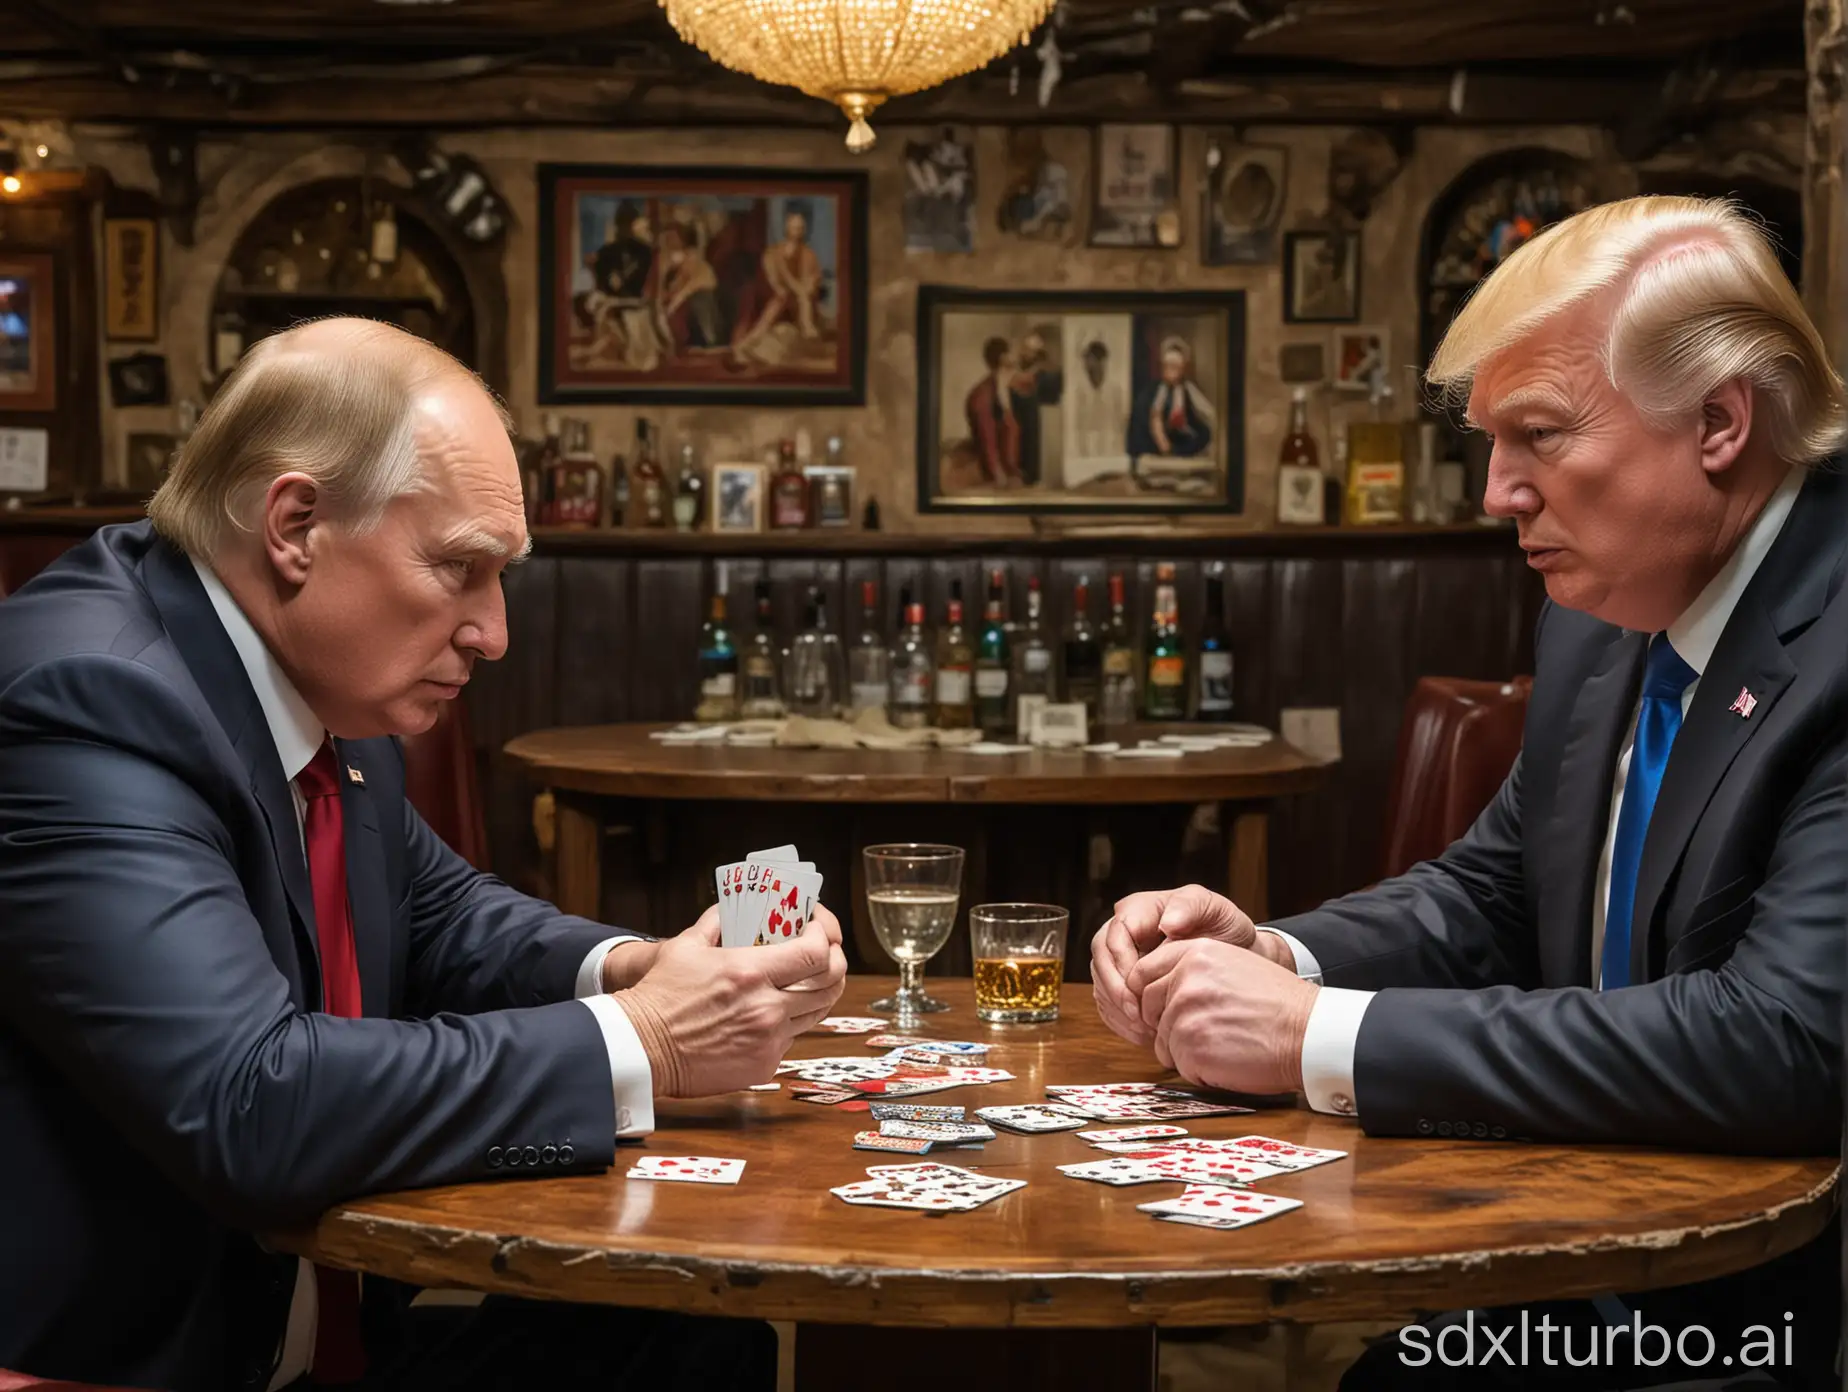 Donald Trump and Vladimir Putin are sitting at a table in a Mexican bar playing cards